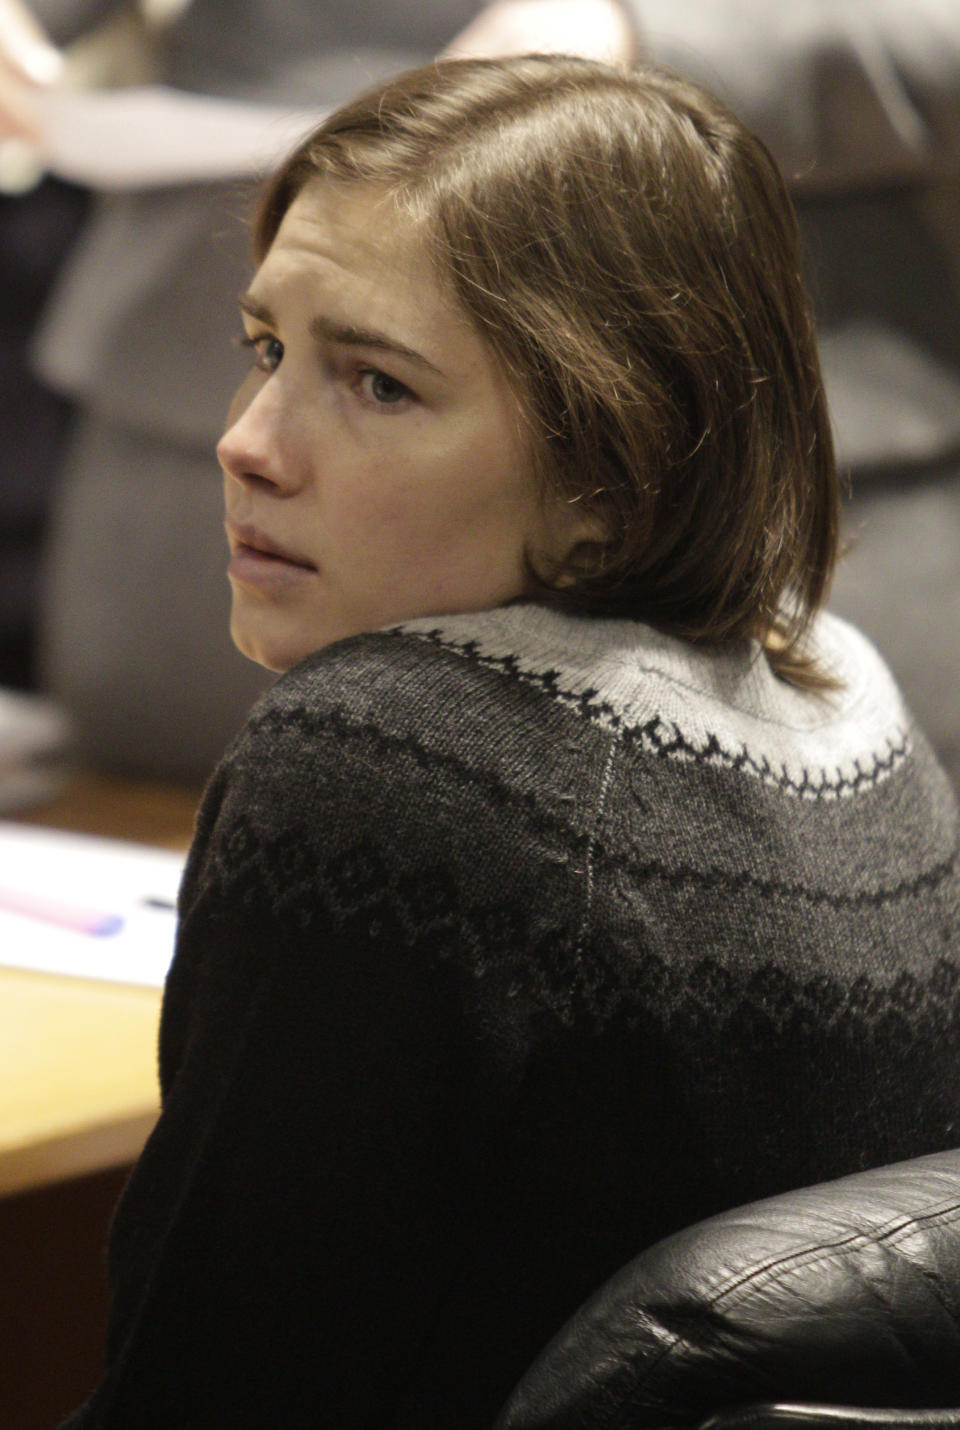 File-This Dec. 11, 2010, file photo shows Amanda Knox sitting at the beginning of a hearing in her appeals trial, at Perugia's courthouse, Italy. To many Americans, especially in her hometown of Seattle, Amanda Knox seems the victim, unfairly hounded by a capricious foreign legal system for the death of a 21-year-old British woman. But in Italy and elsewhere in Europe, others see her as someone who got away with murder, embroiled in a case that continues to make global headlines and reinforces a negative image of Americans behaving badly, even criminally, abroad without any punishment. As she remains free in the U.S., these perceptions will not only fuel the debate about who killed Meredith Kercher in 2007 and what role, if any, Knox played in her death, but also about whether U.S. authorities should, if asked, send her to Italy to face prison. (AP Photo/Pier Paolo Cito, File)